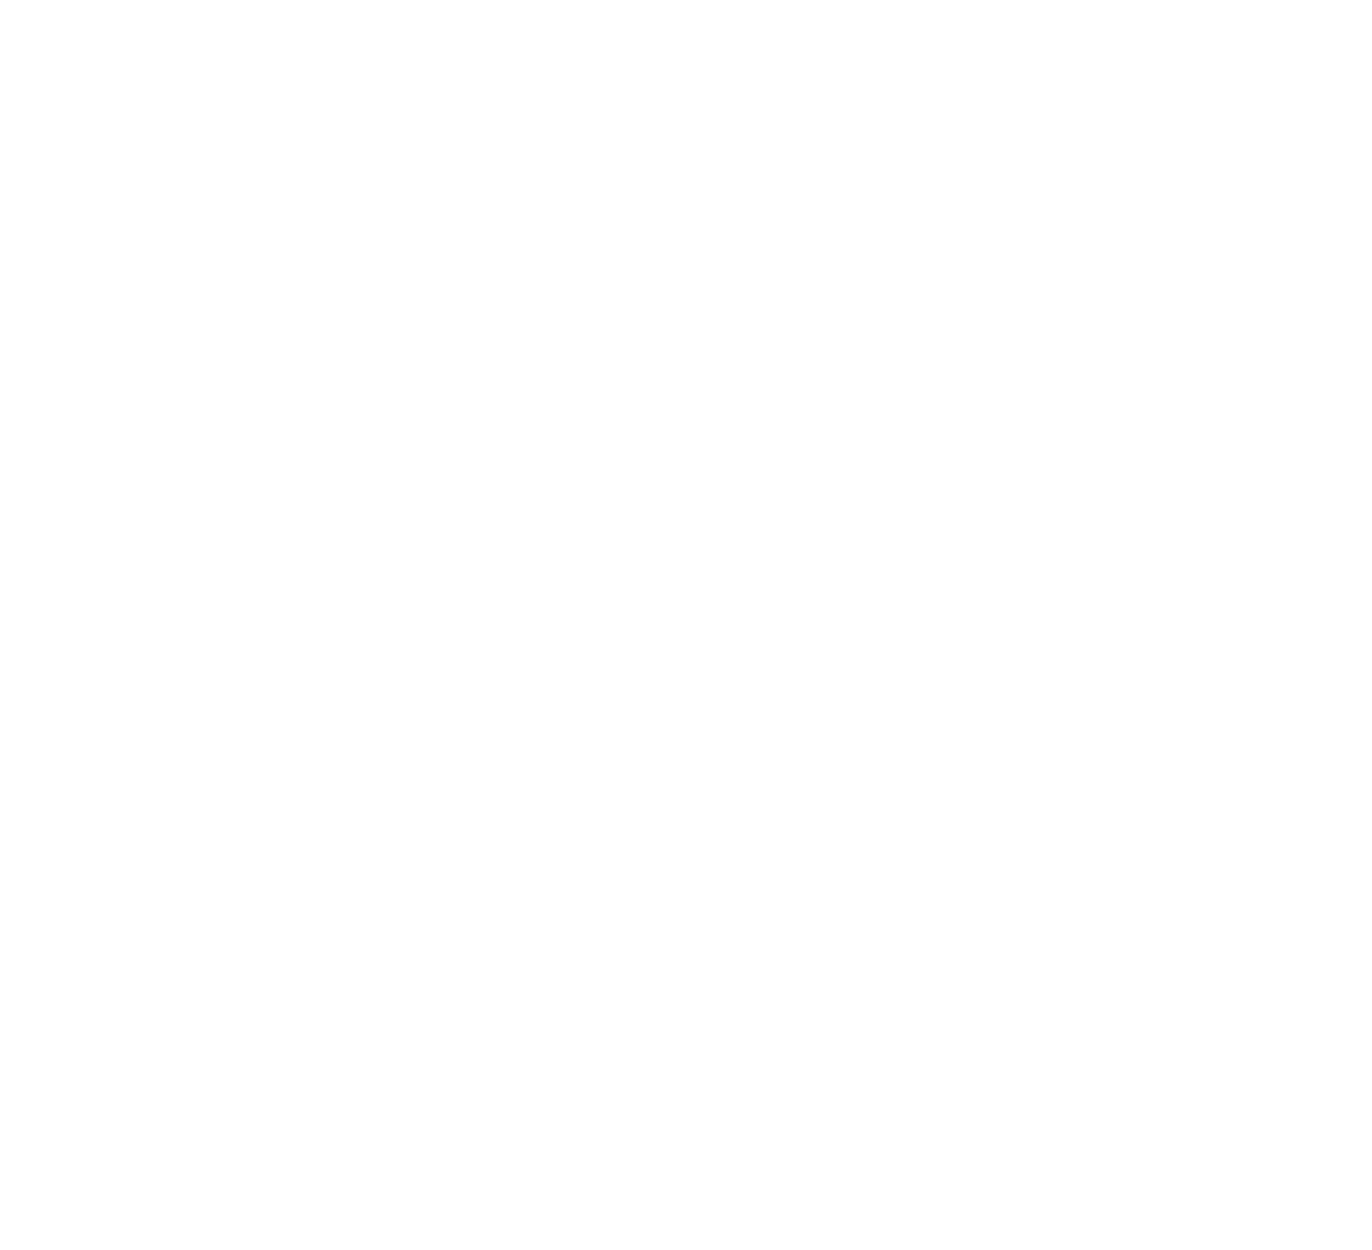 bcch_foundation_BW_white-01.png